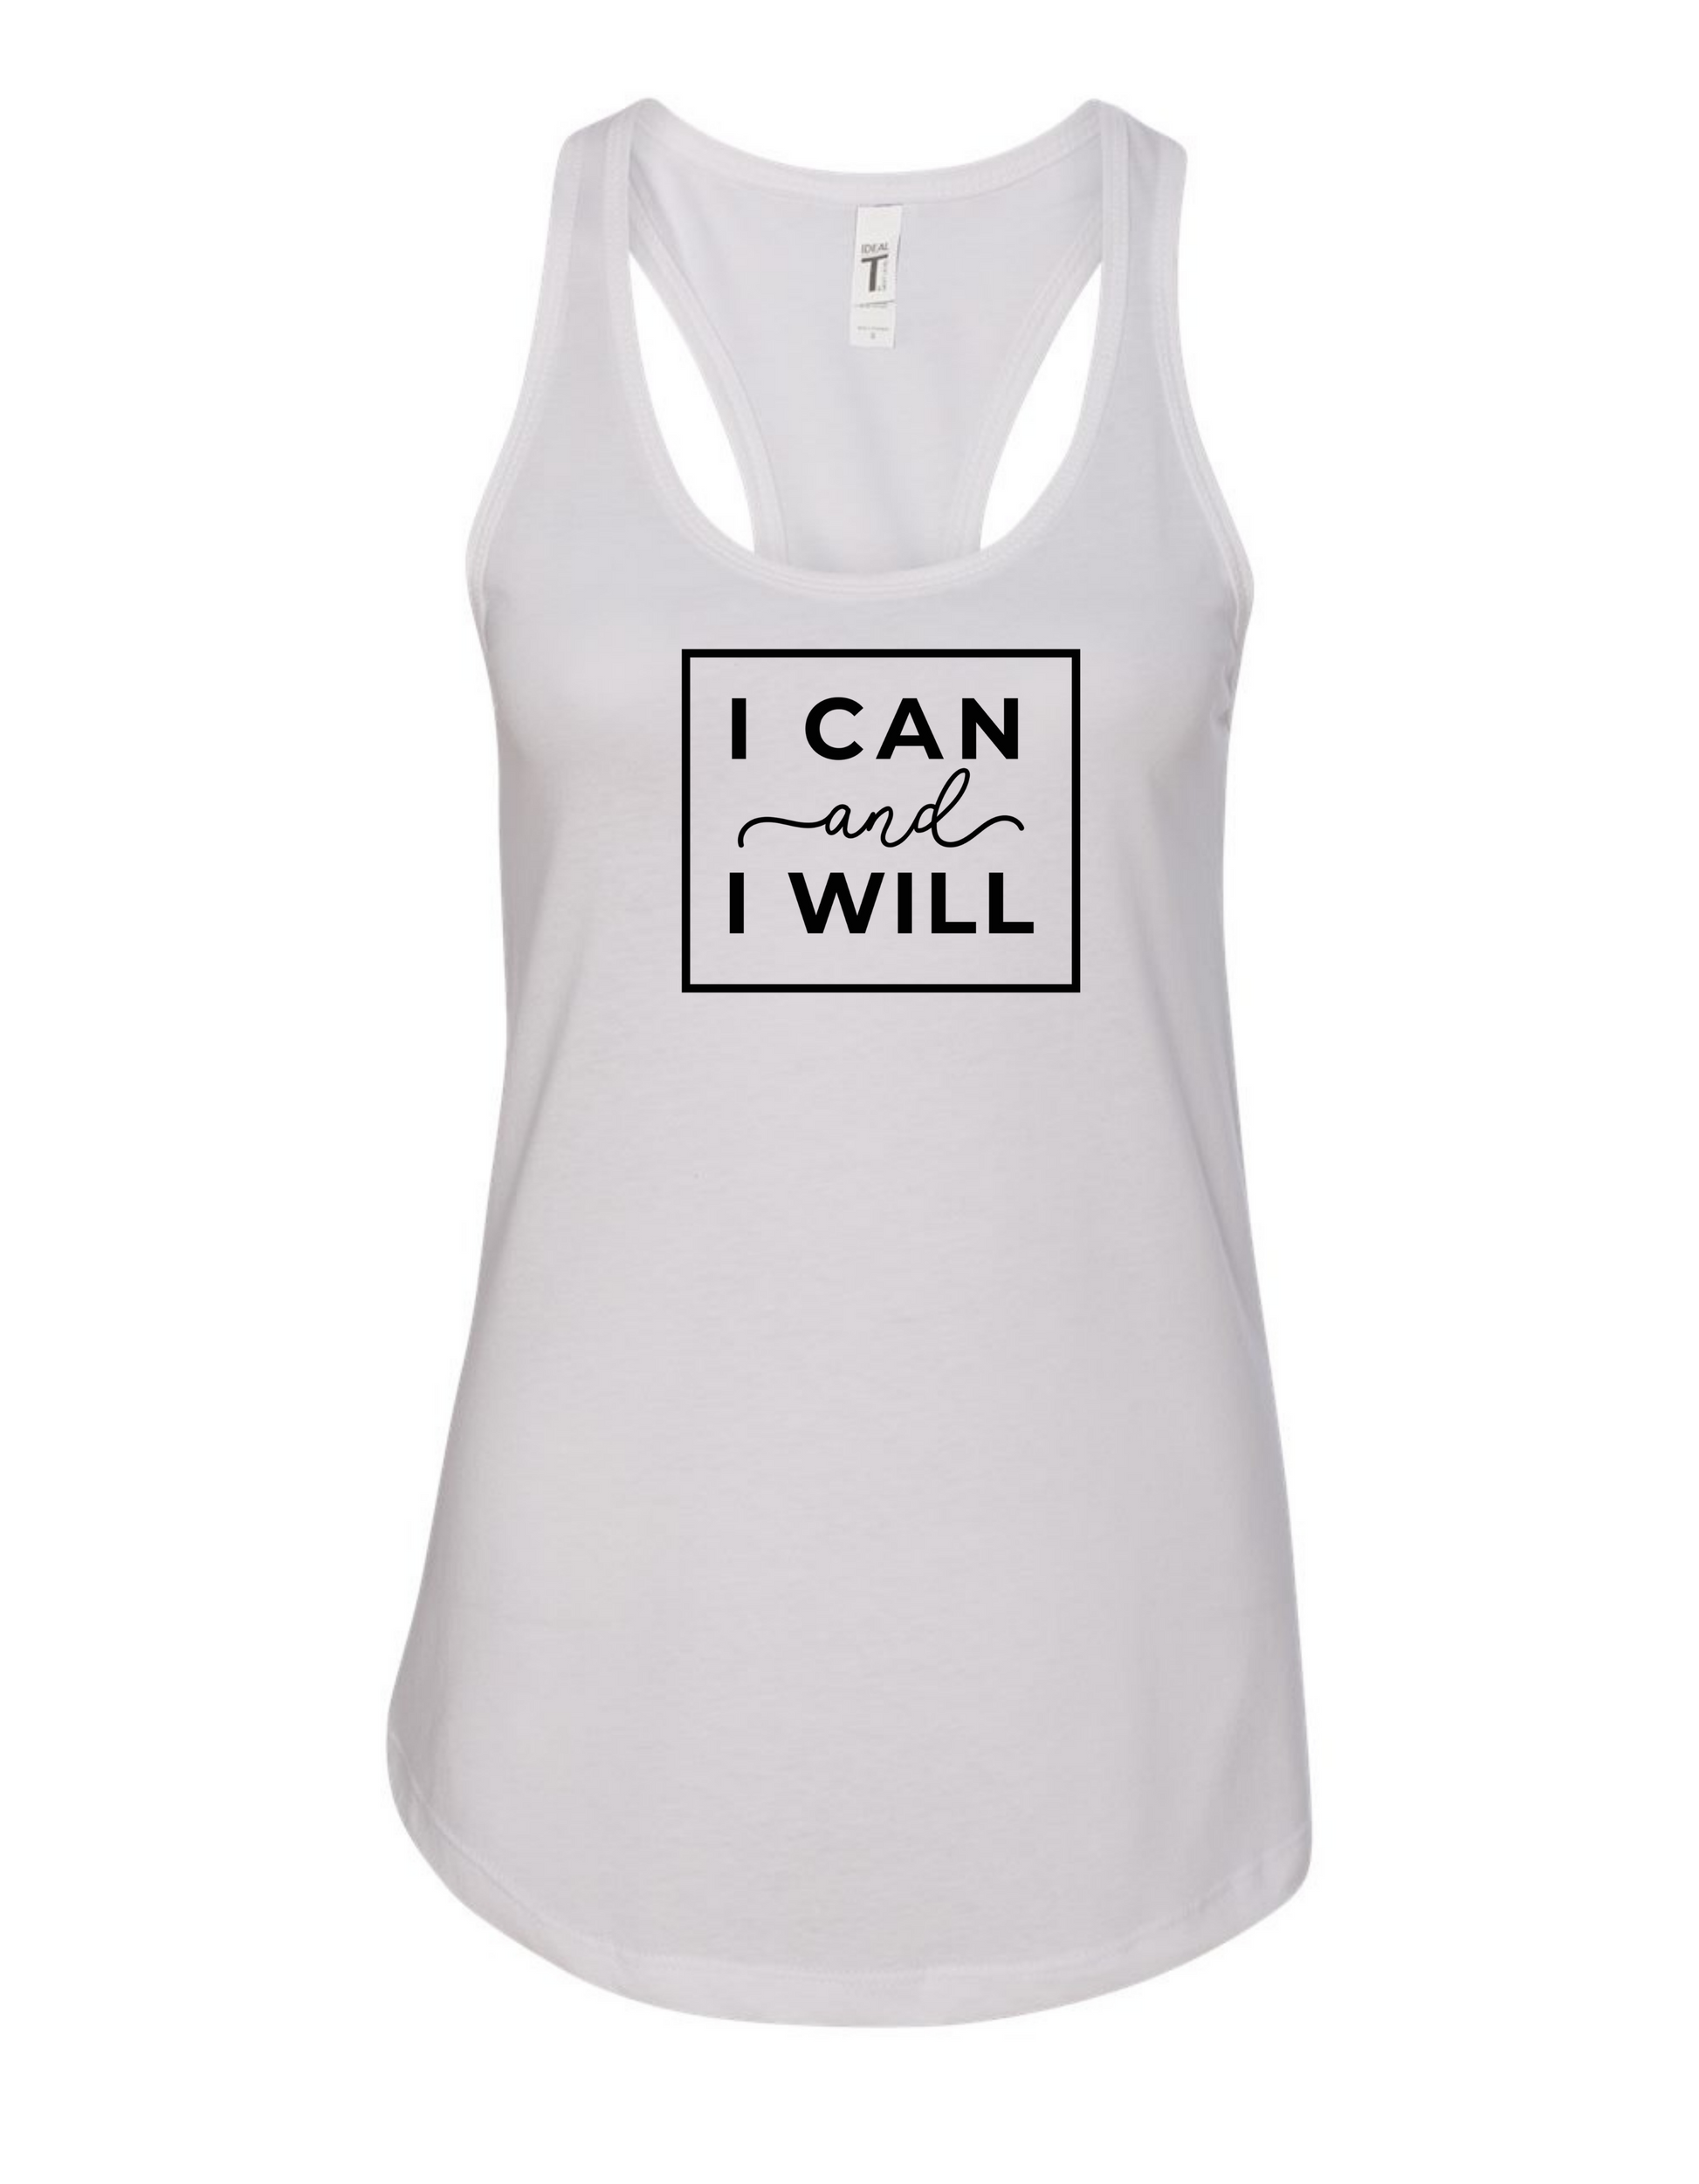 I Can and I Will - Racerback Ladies Tank - Mister Snarky's